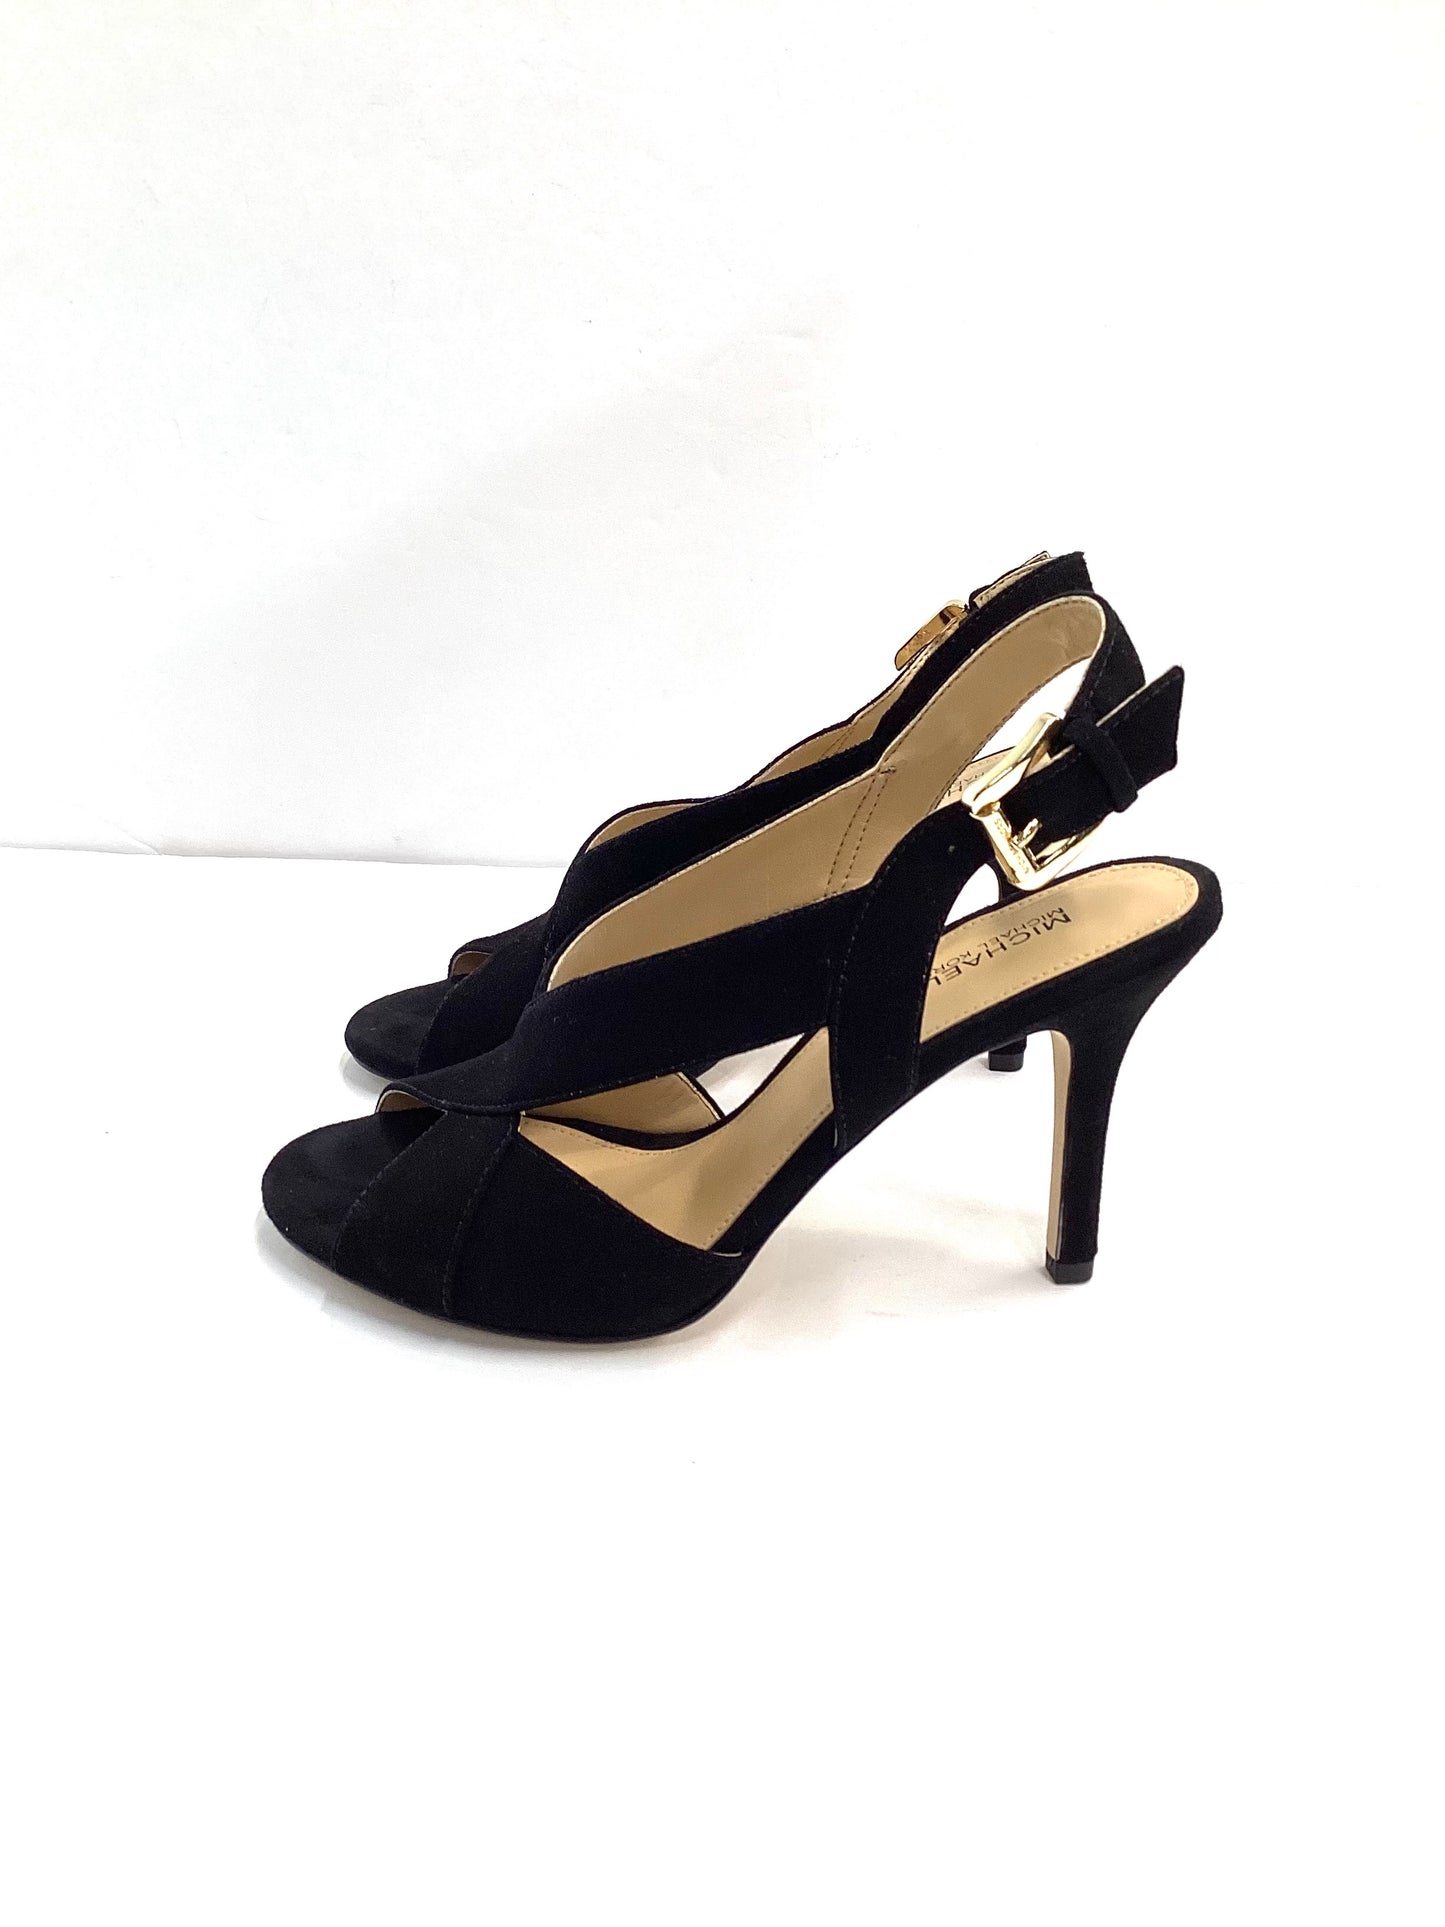 Shoes Heels Stiletto By Michael Kors  Size: 6.5